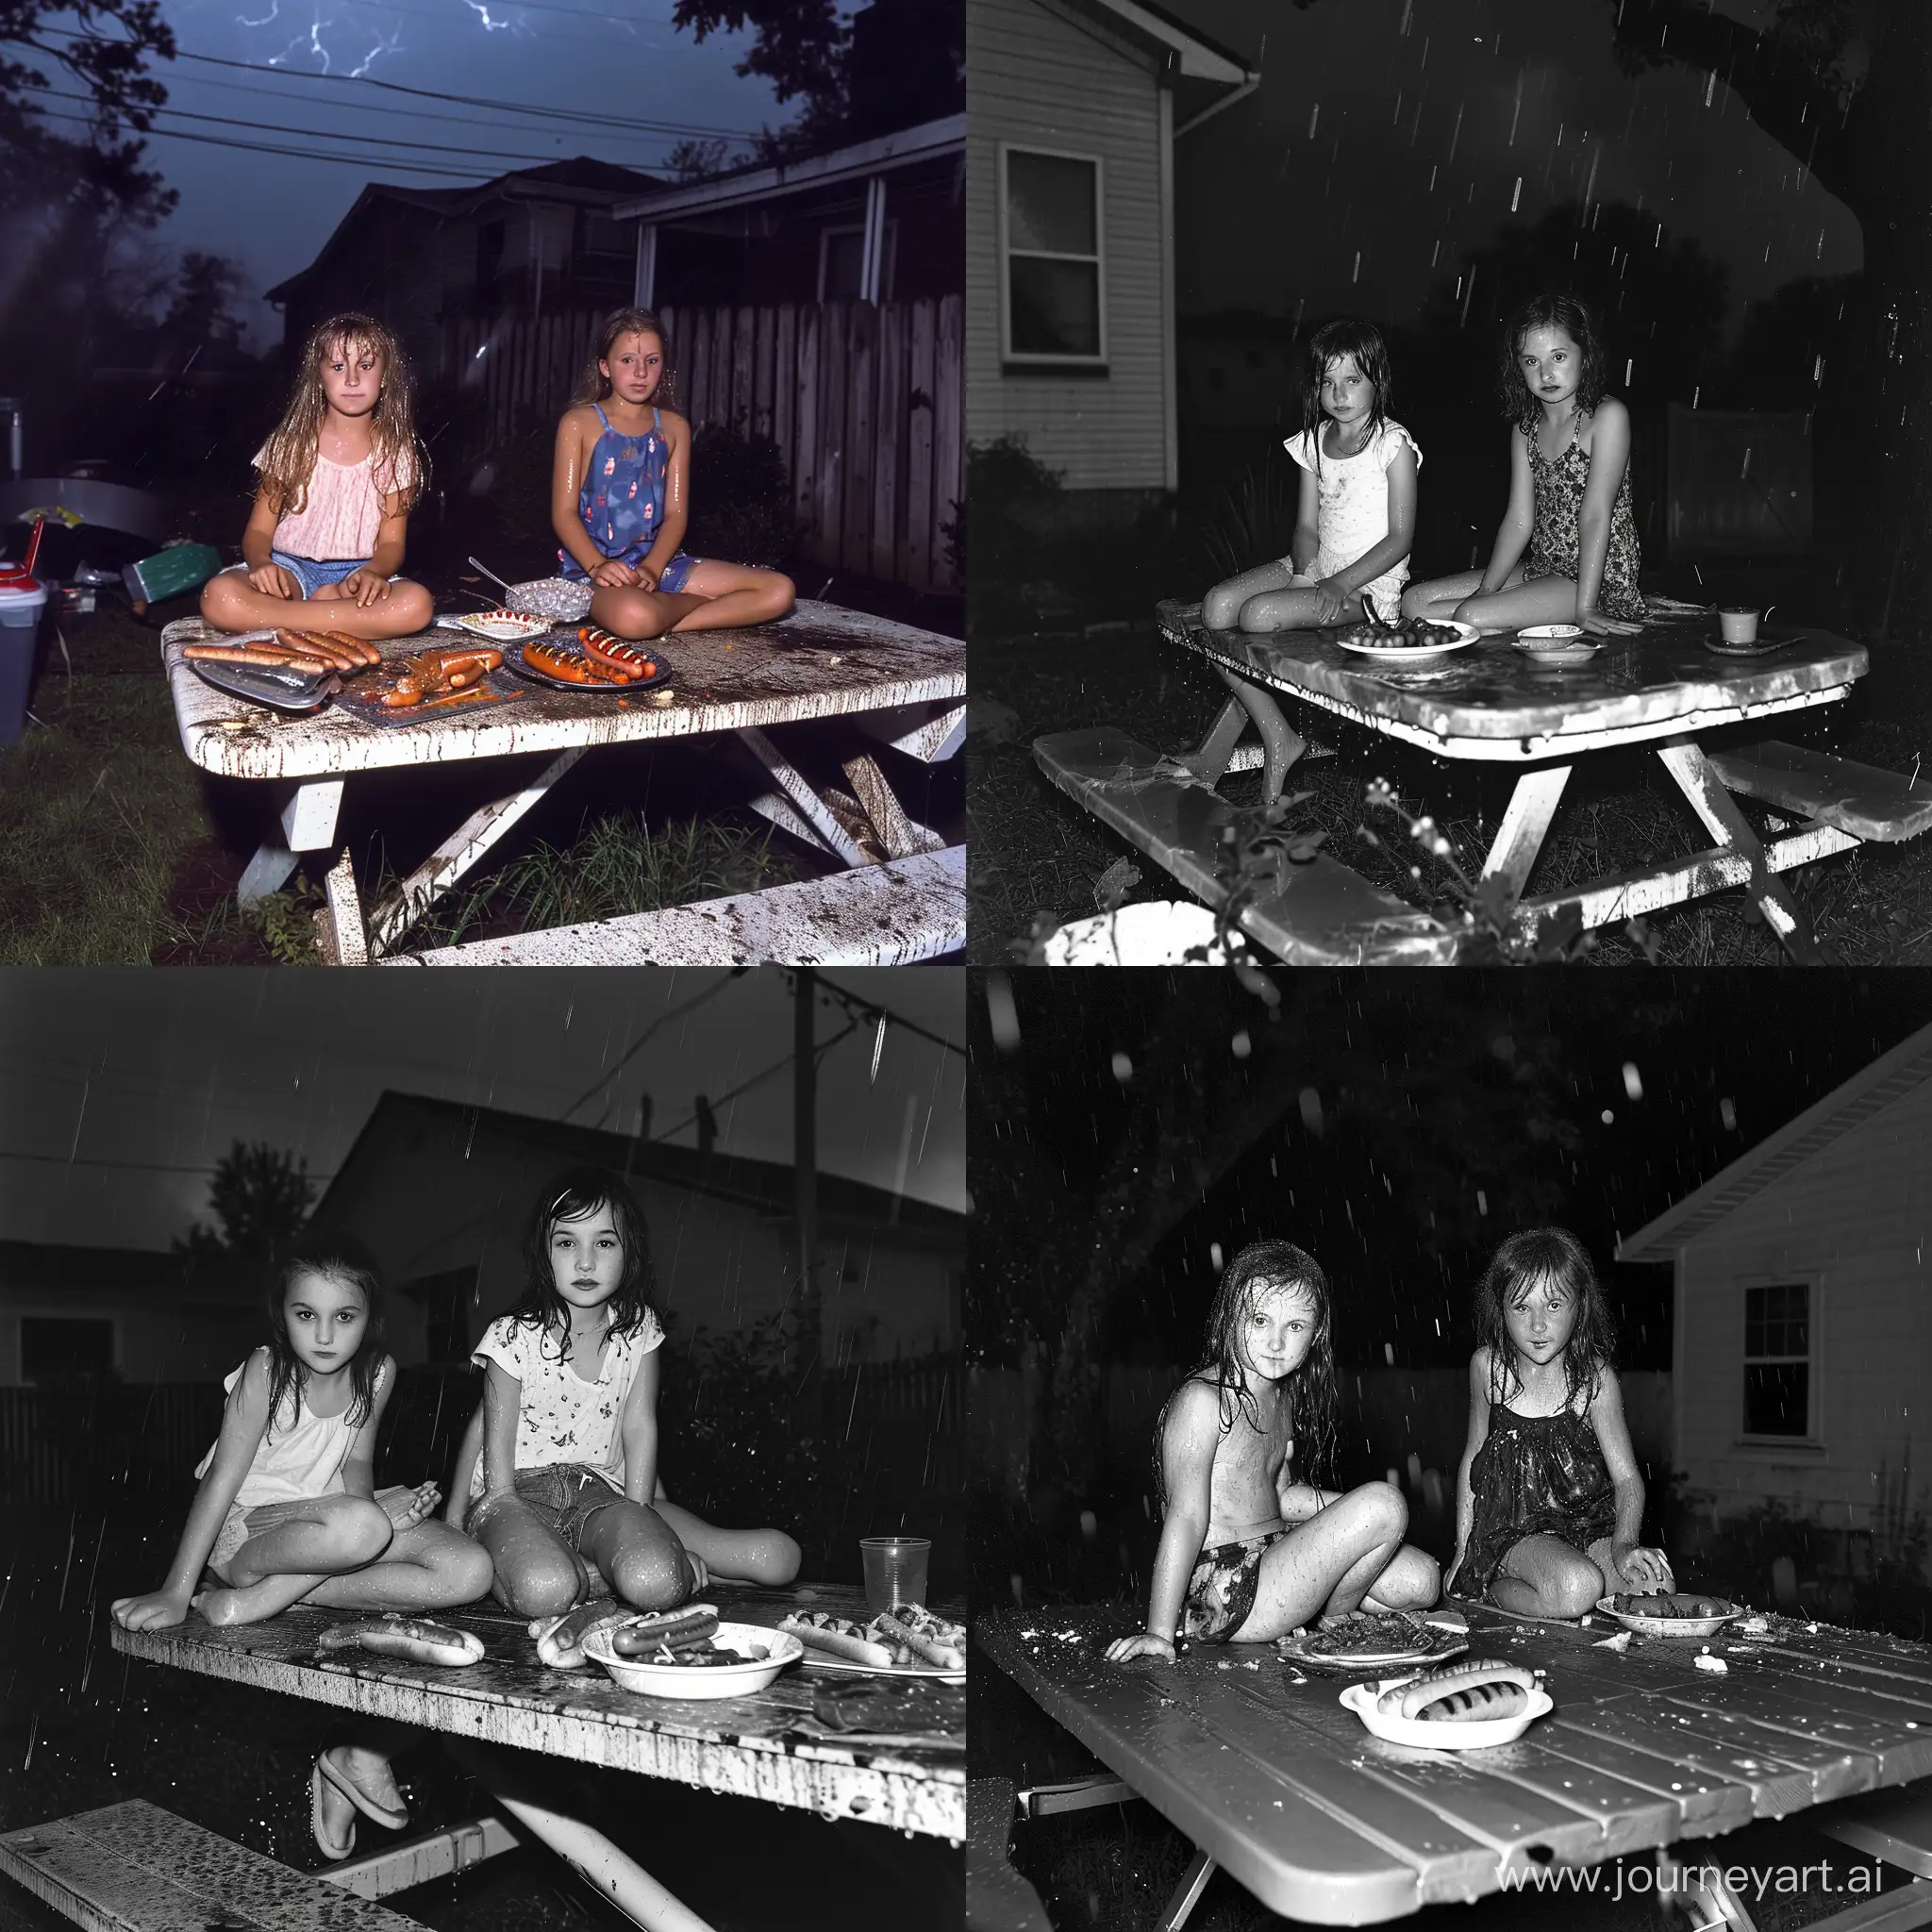 RainDrenched-Nighttime-Picnic-with-American-Girls-and-Hotdogs